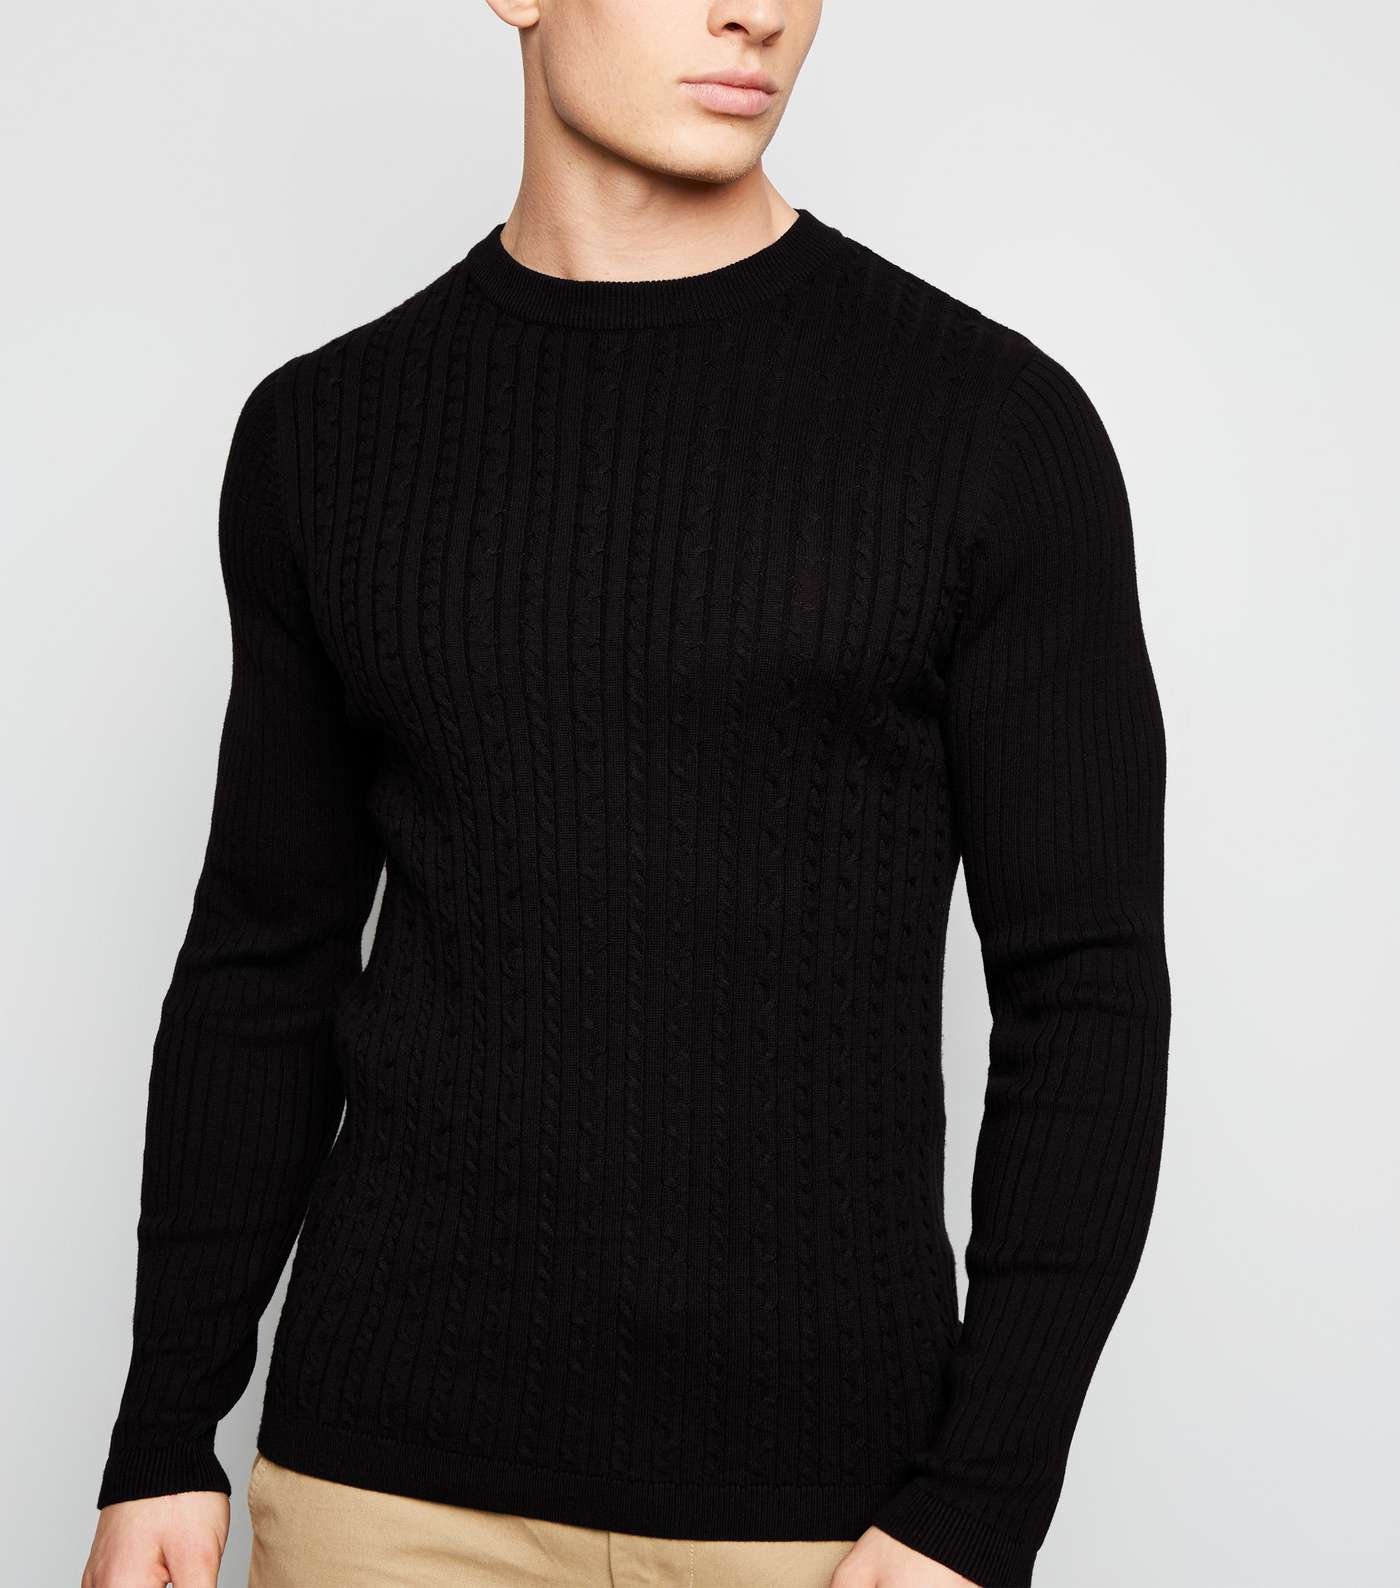 Black Long Sleeve Cable Knit Jumper